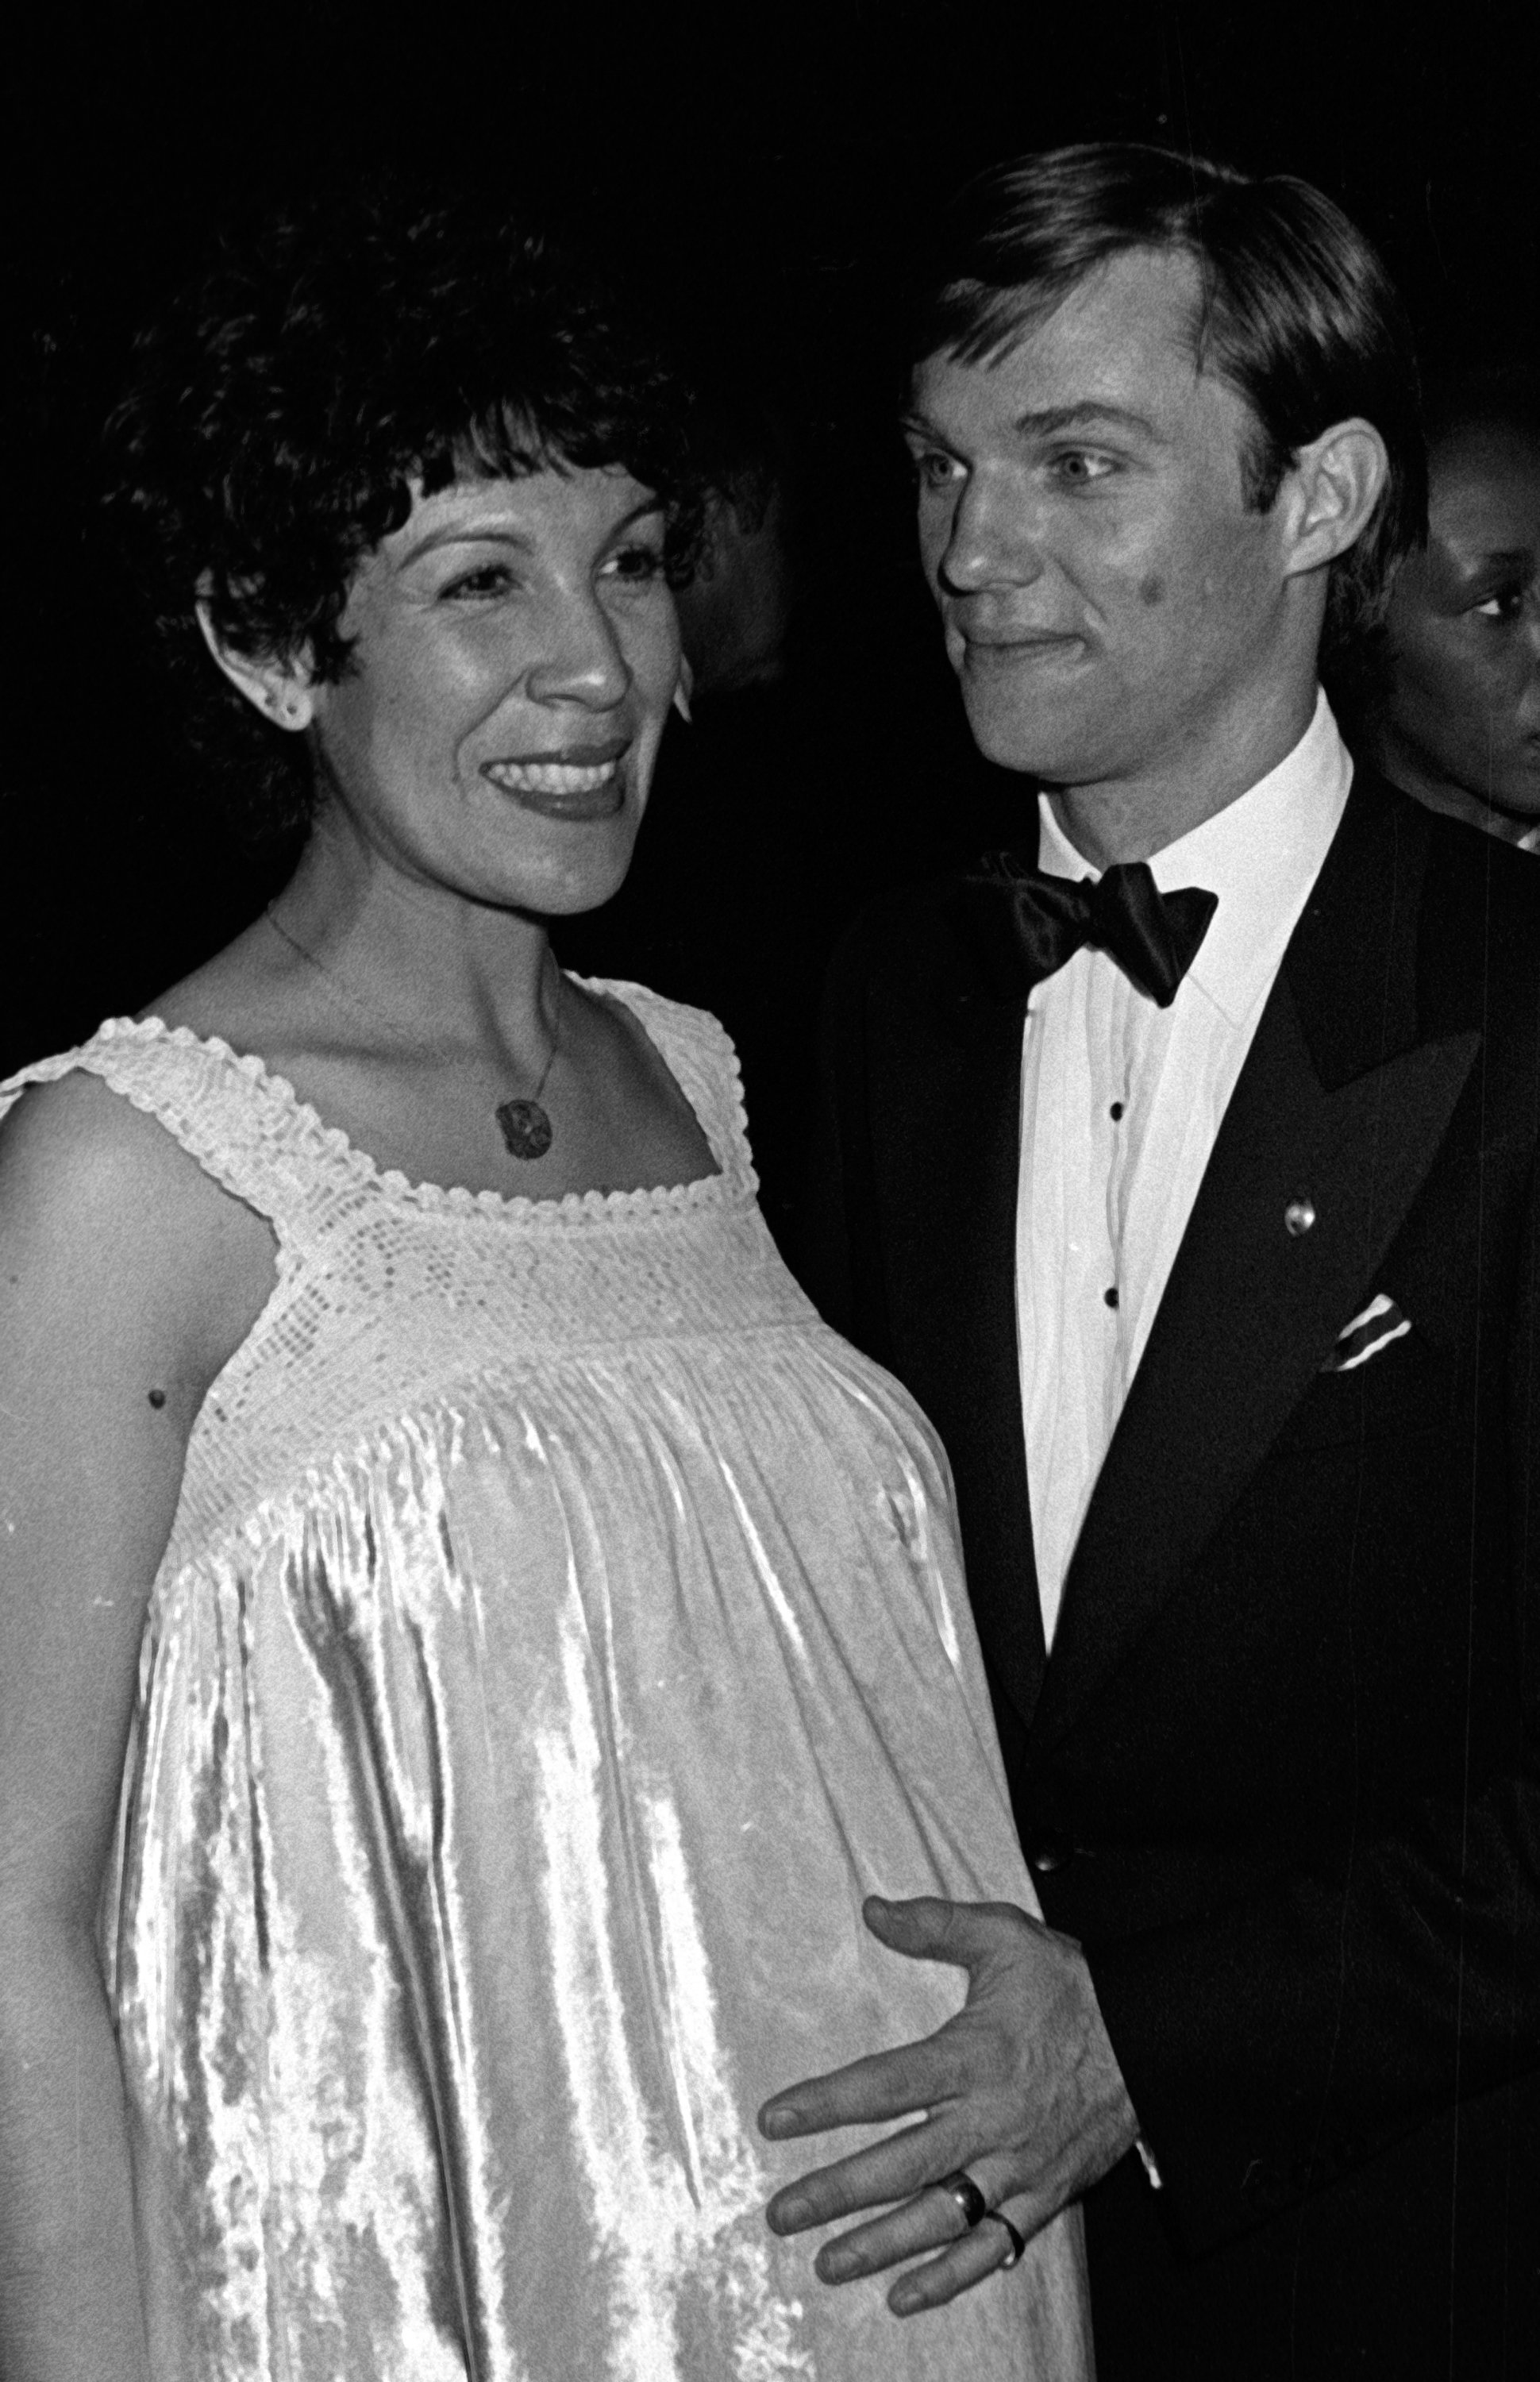 Richard Thomas and Alma Gonzales at the 35th Annual Tony Awards on June 7, 1981 in New York City | Photo: Getty Images